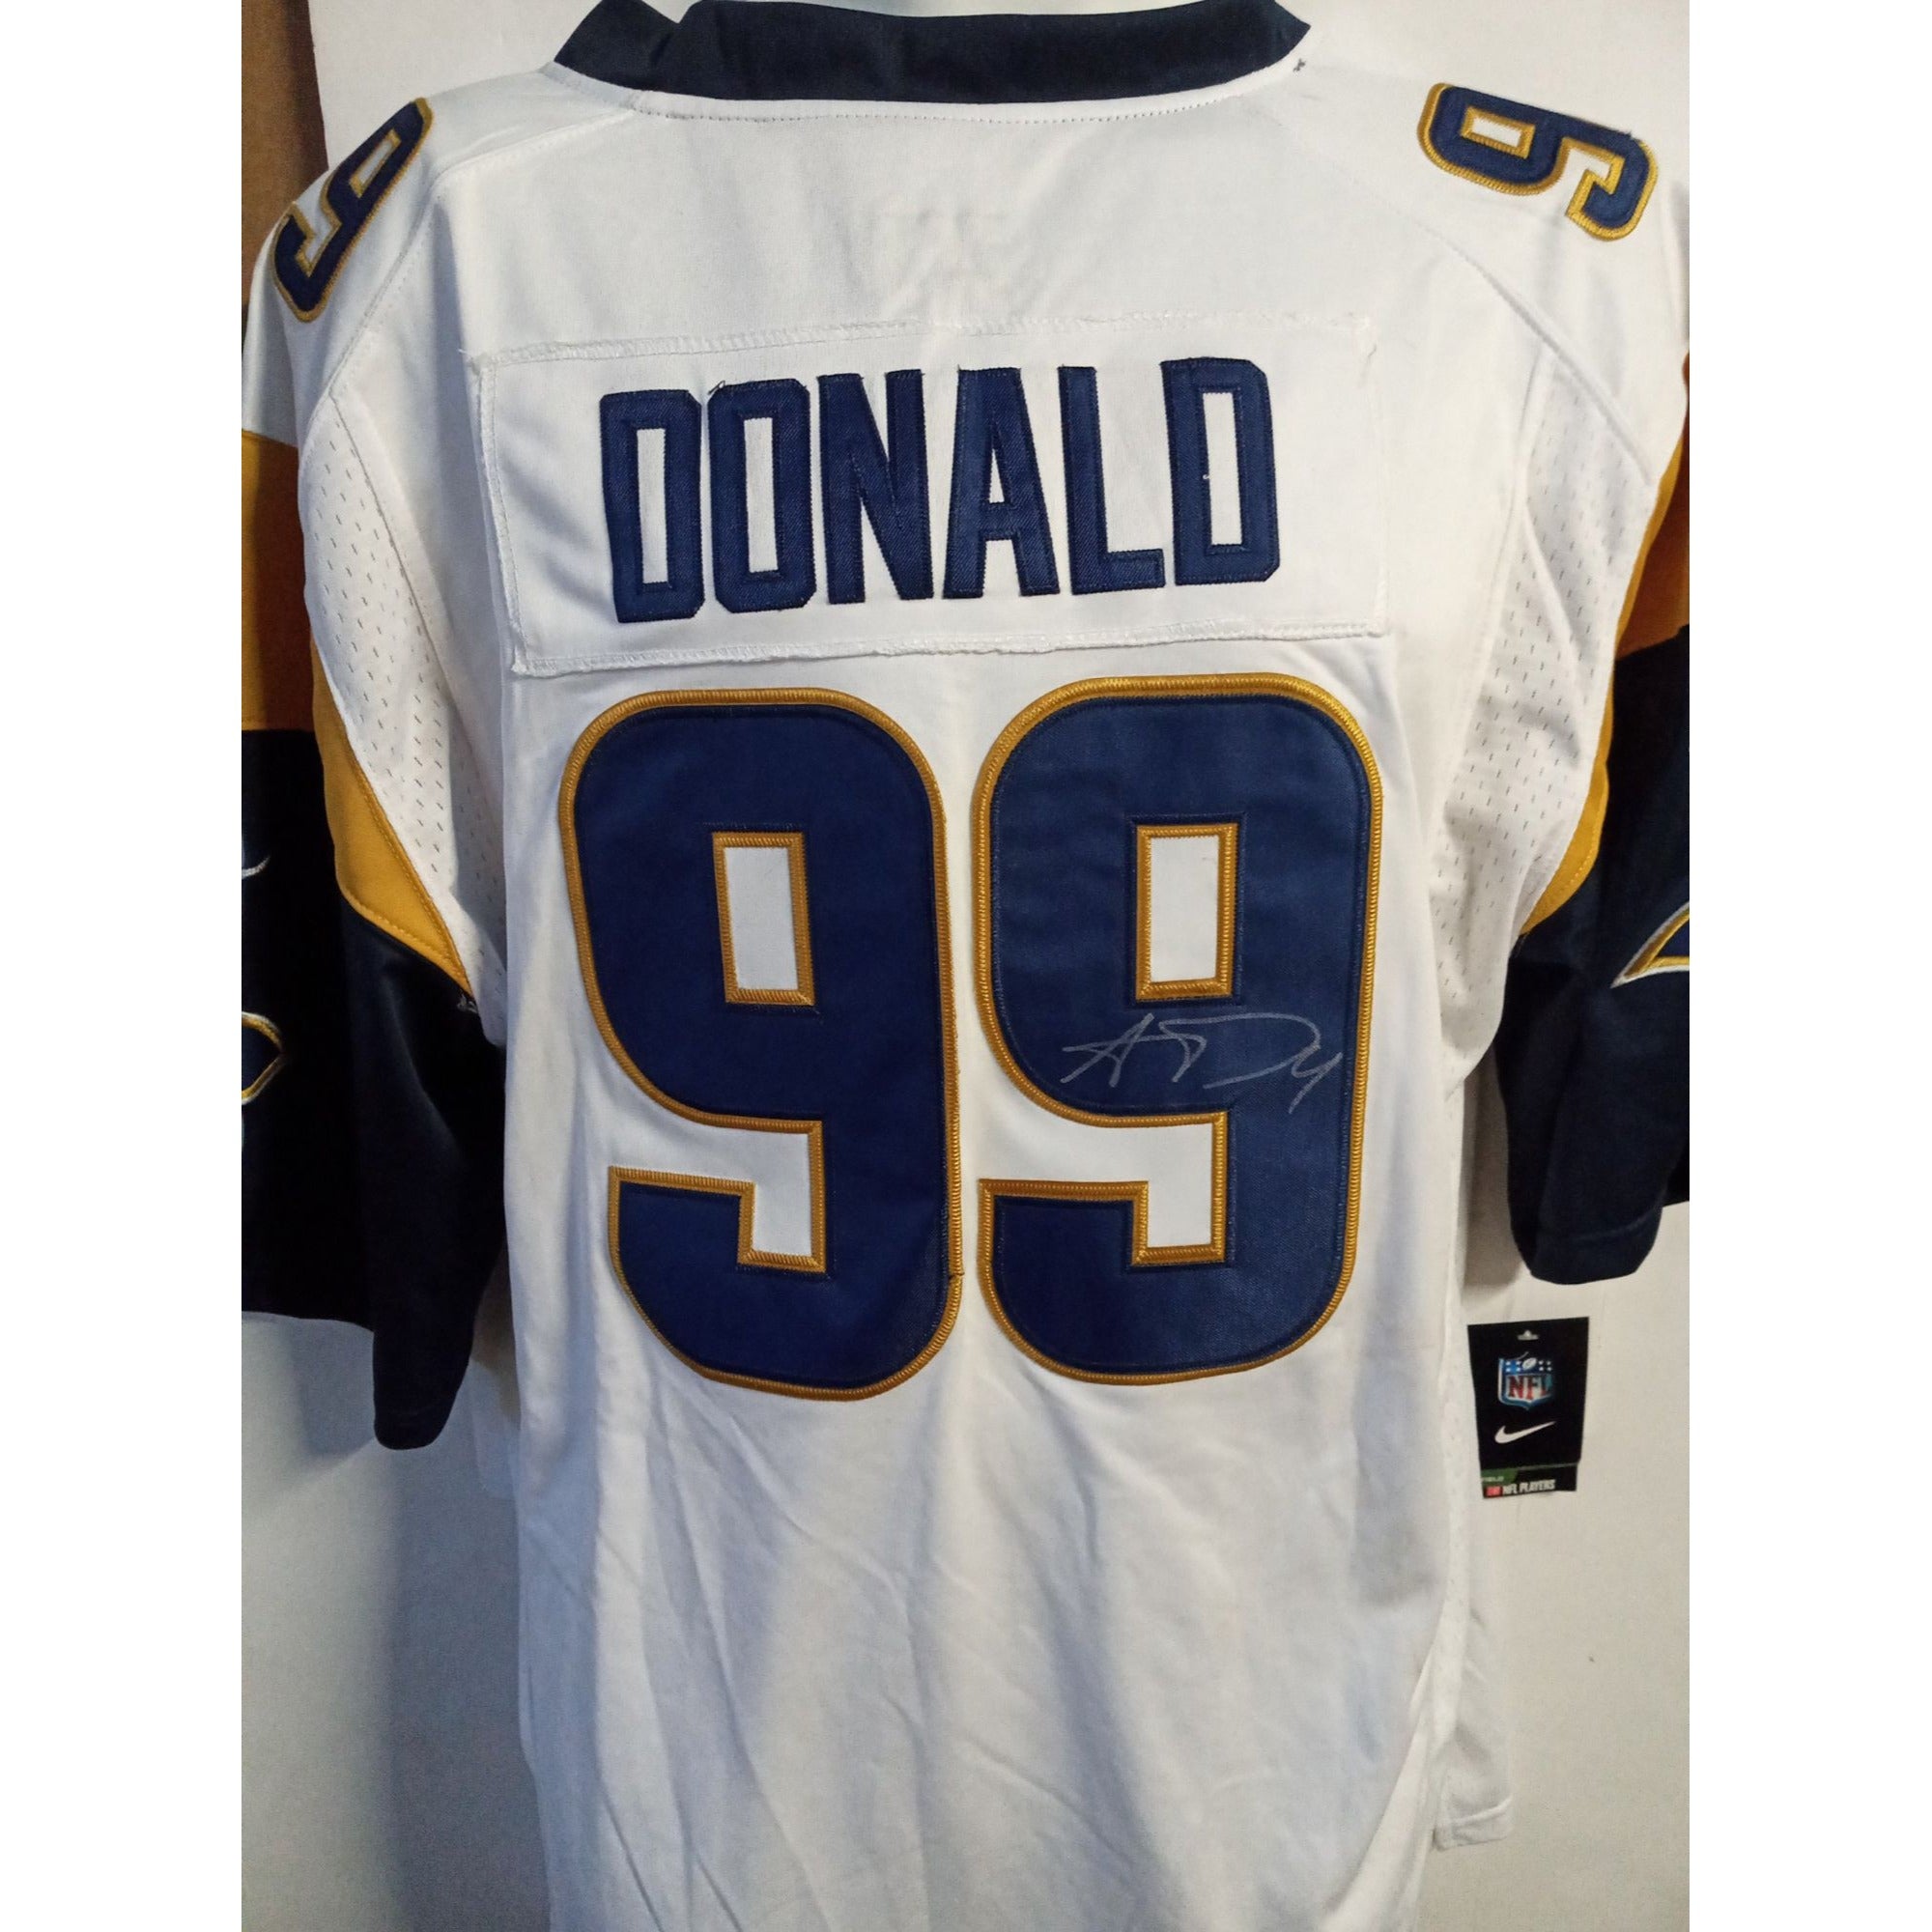 Aaron Donald Los Angeles Rams jersey signed with proof